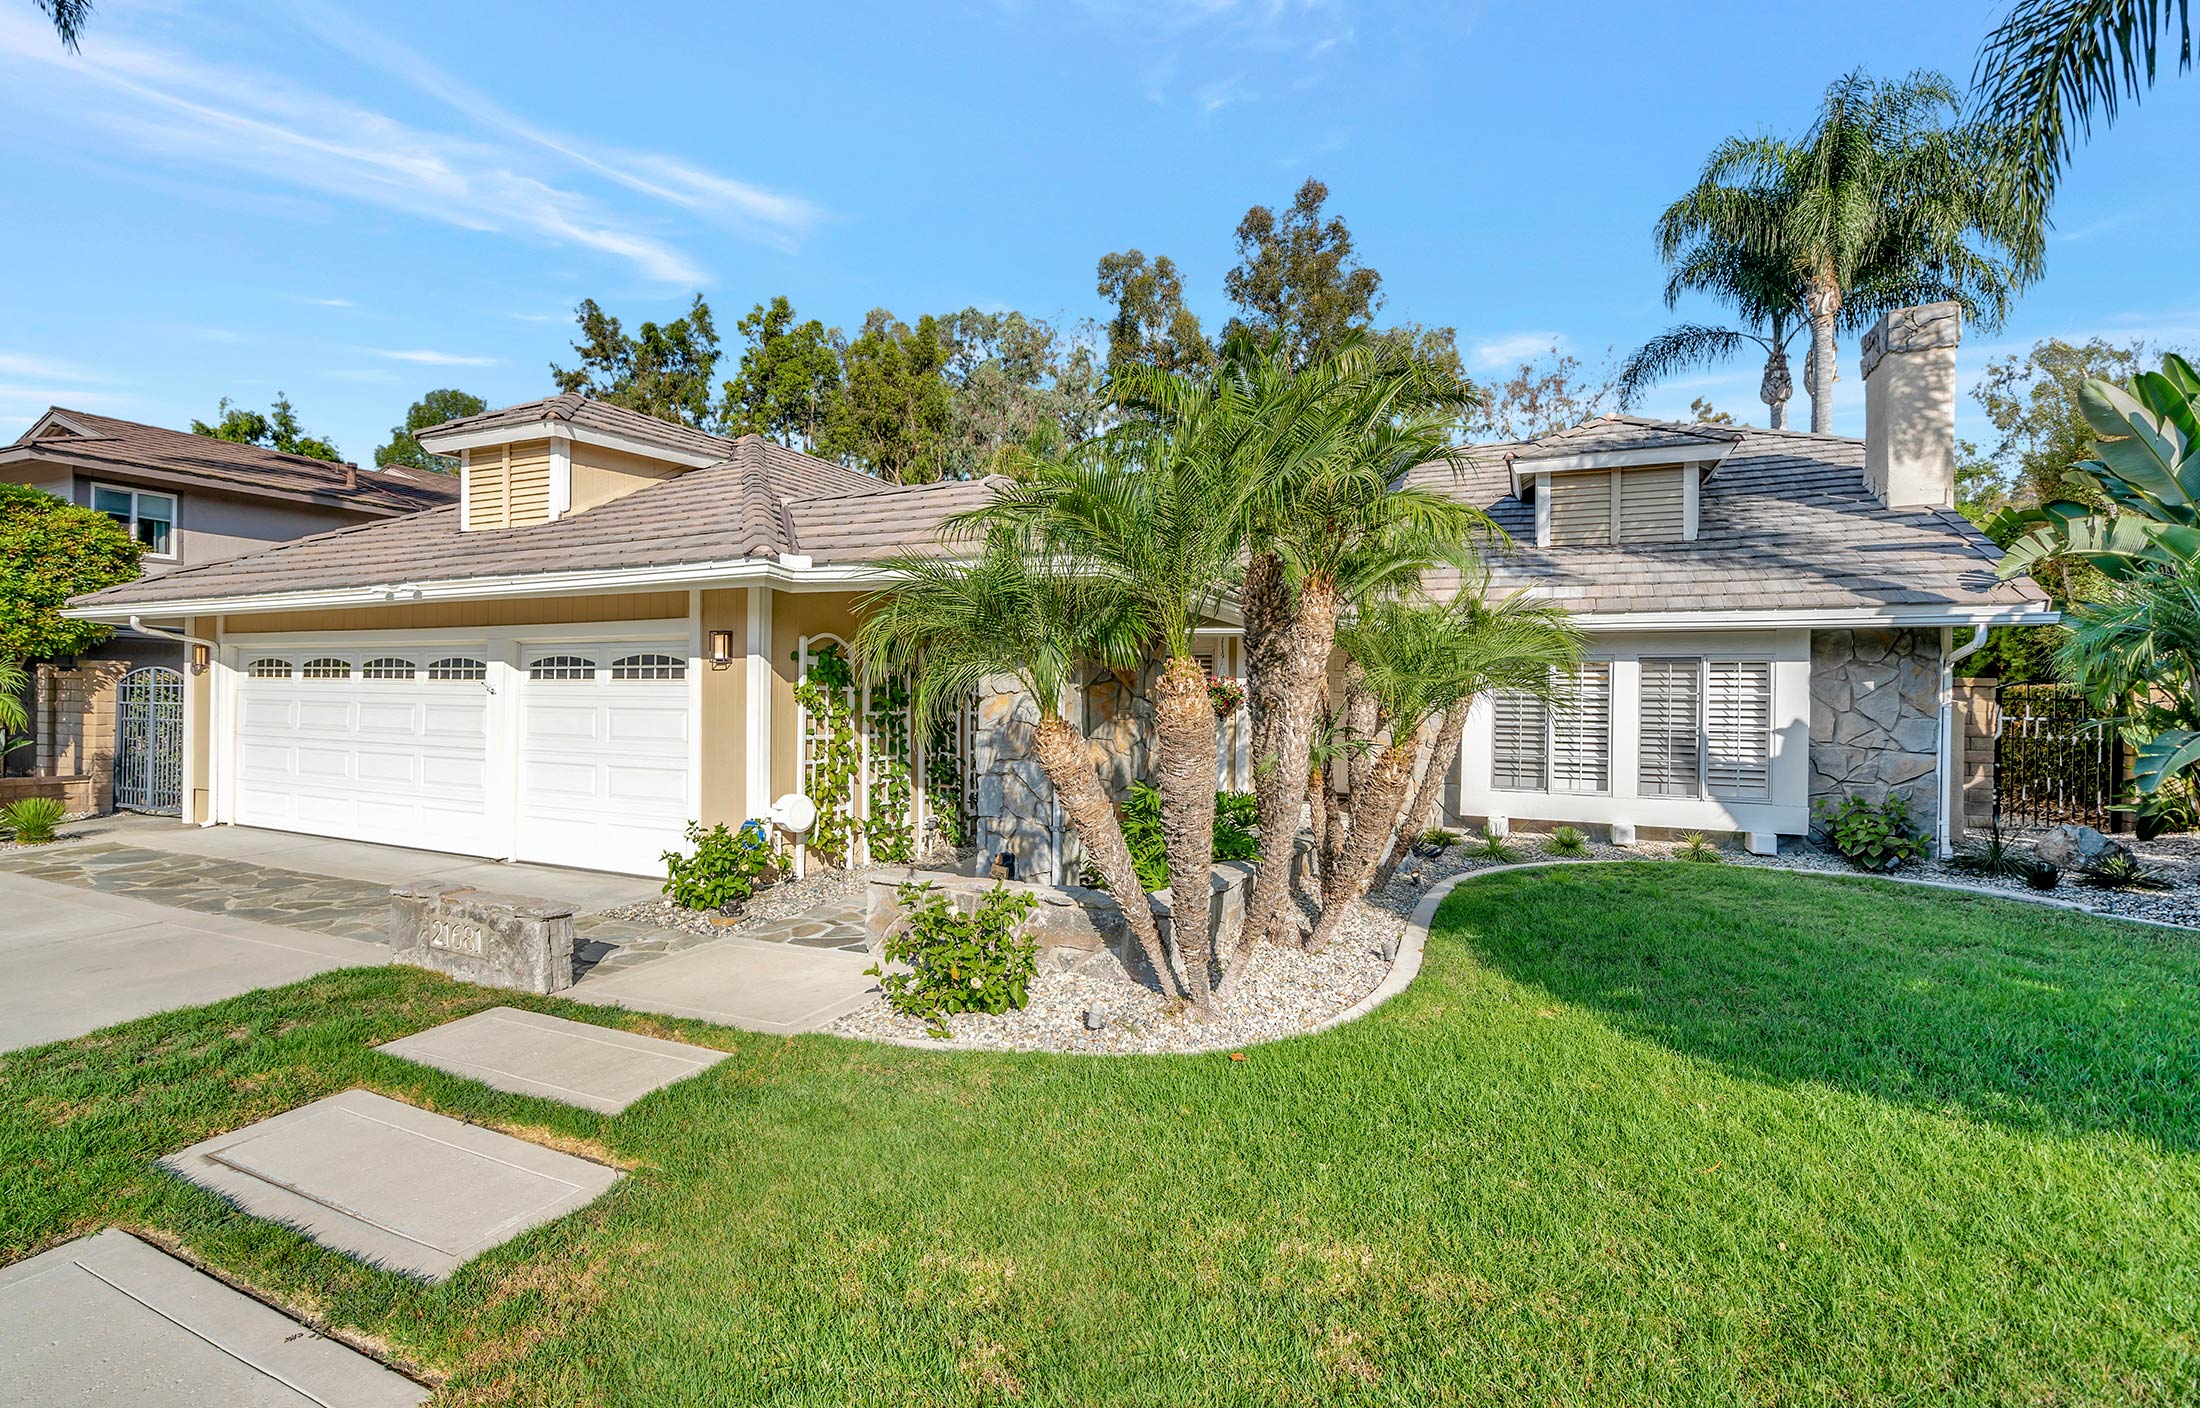 Photo of 21681 Rushford Dr, Lake Forest, CA 92630